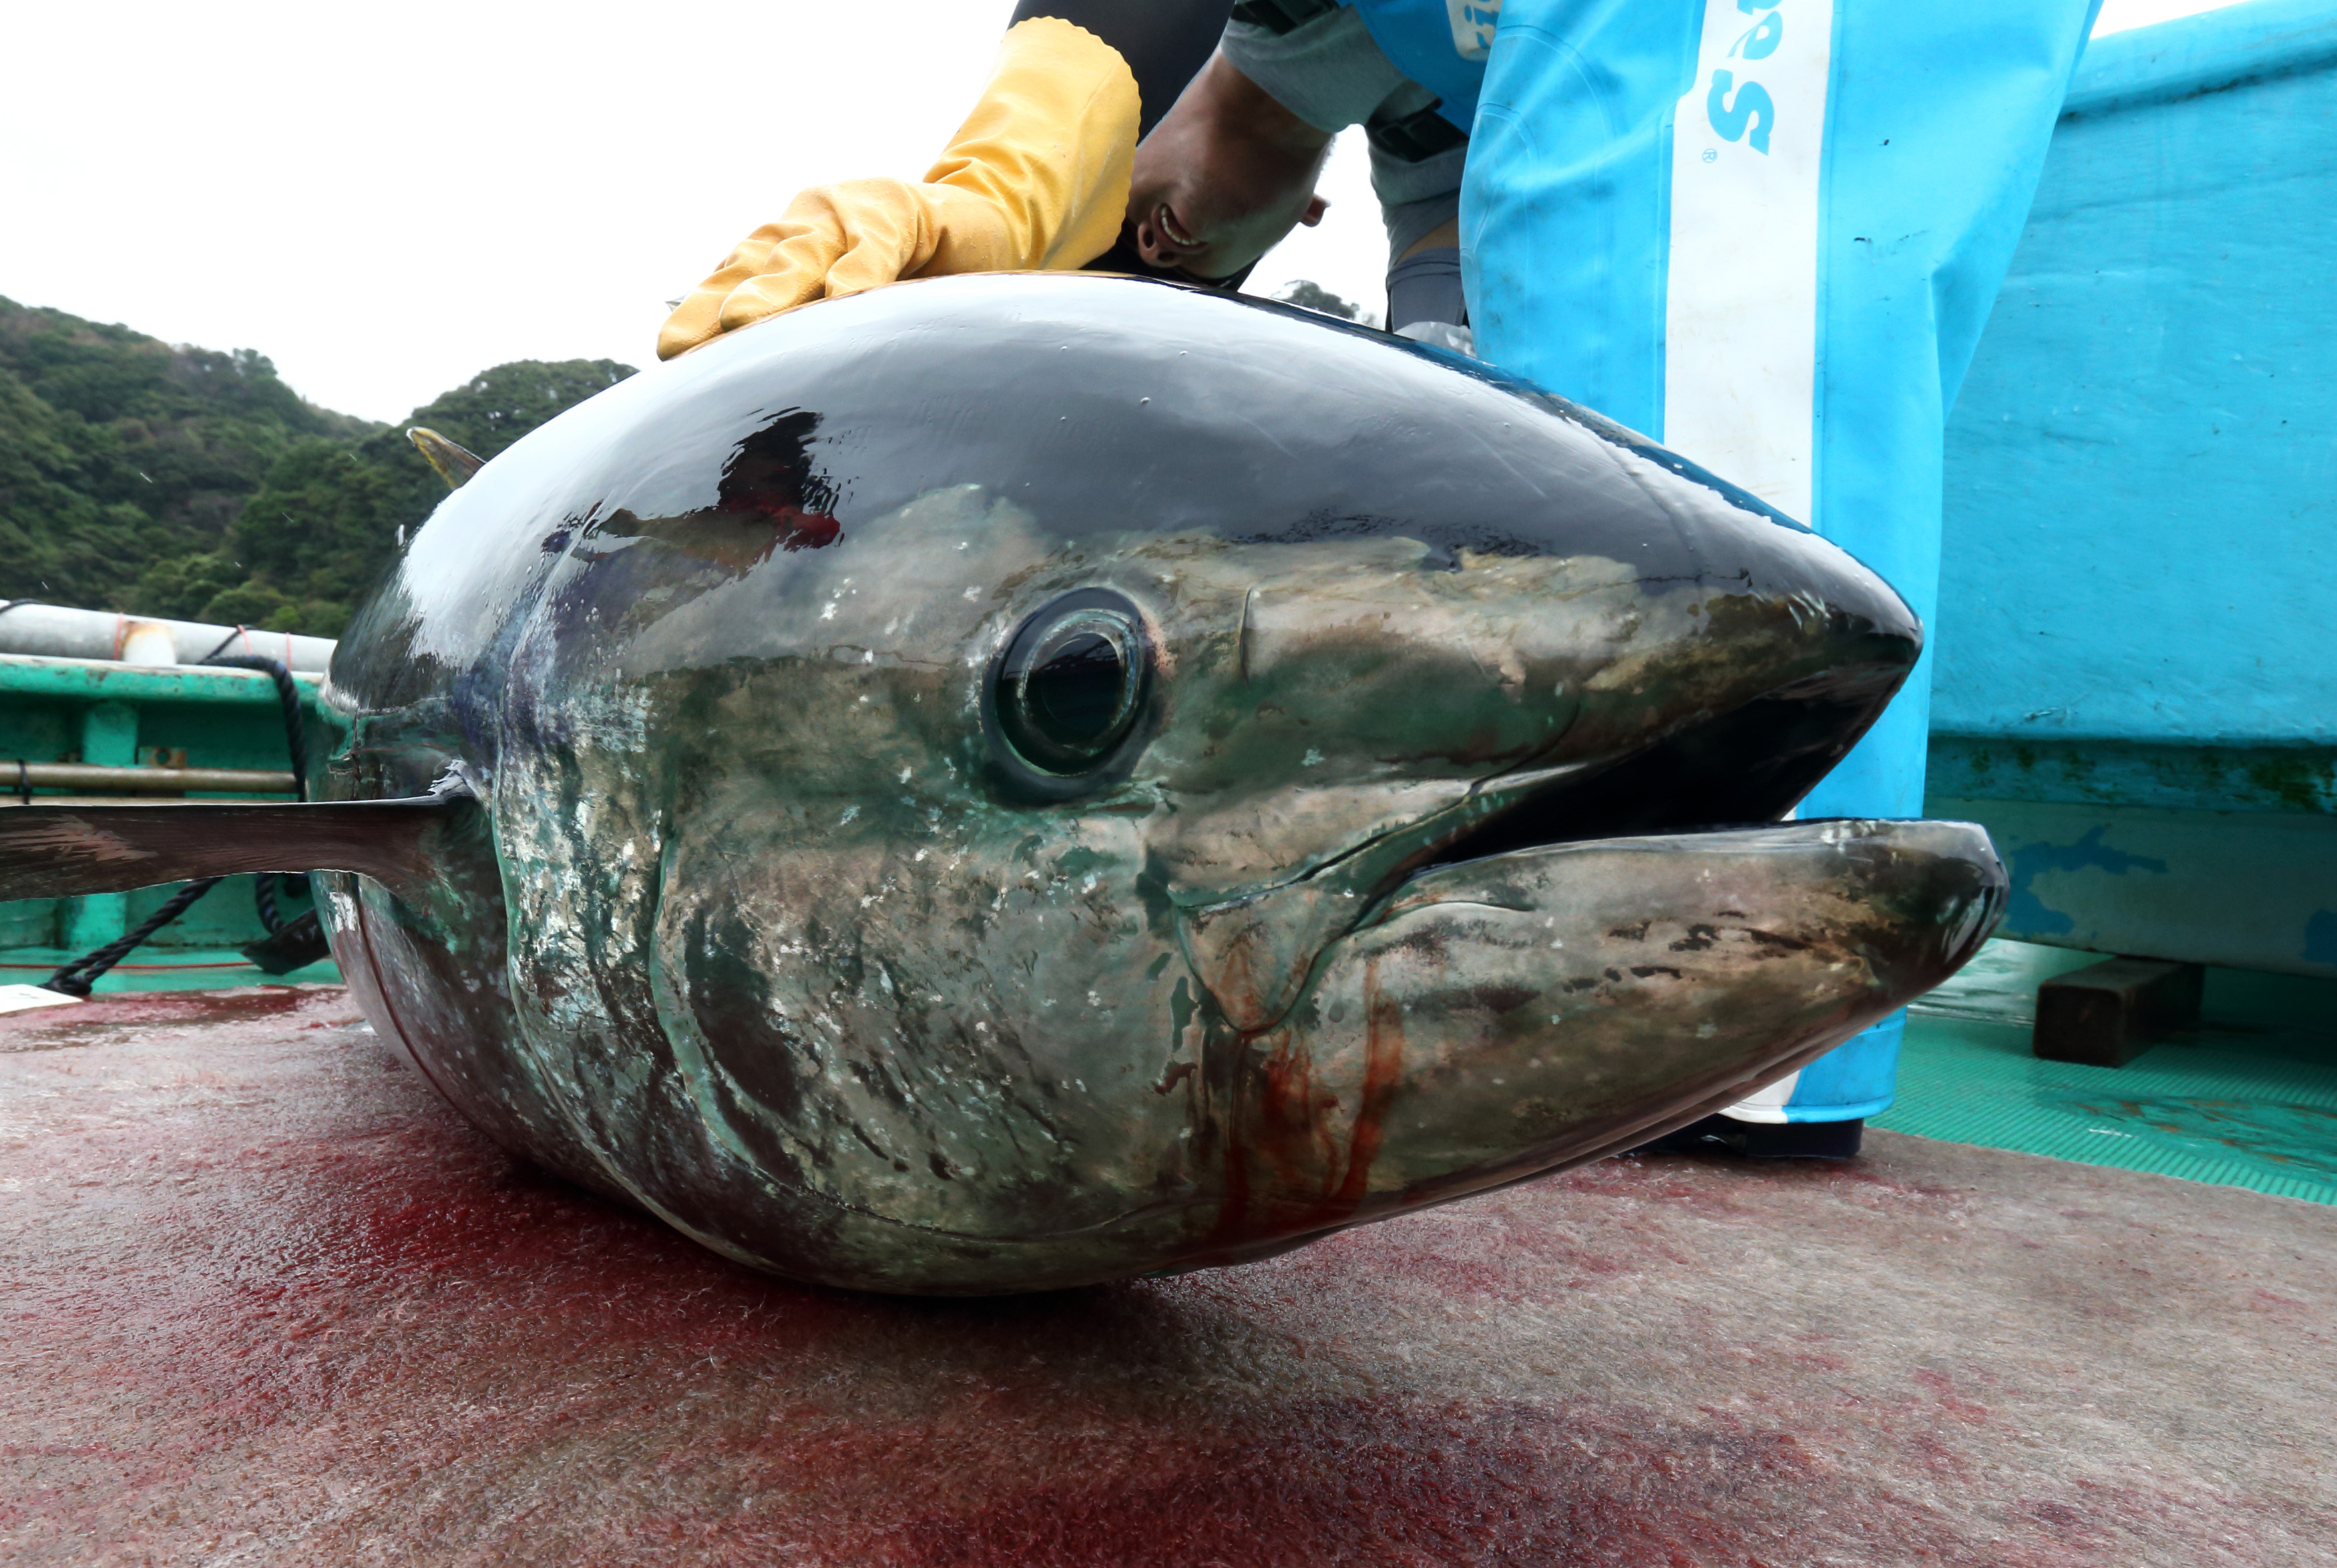 A farmed blue-fin tuna on board a boat at a fish farm operated by the laboratory in Kushimoto, Wakayama Prefecture, Japan, on Tuesday, Oct. 21, 2014. (Tomohiro Ohsumi—Bloomberg / Getty Images)